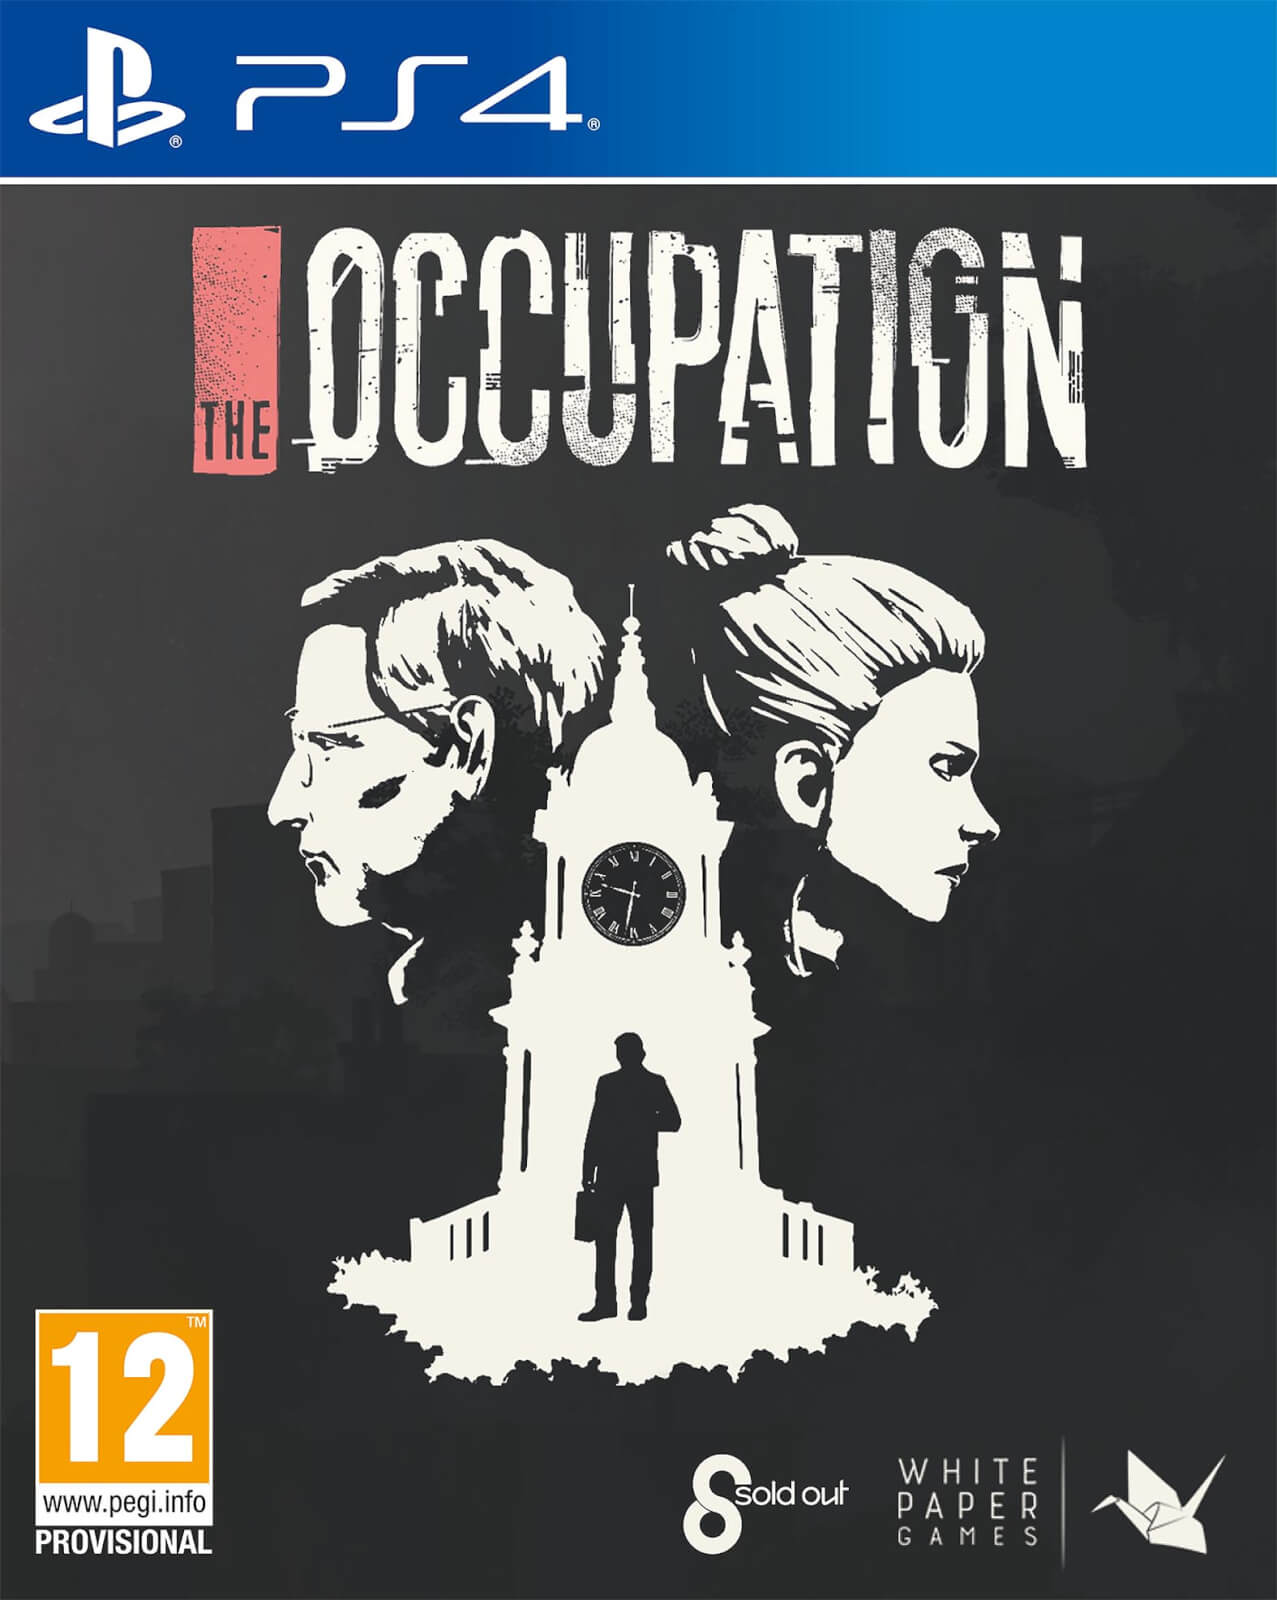 The occupation